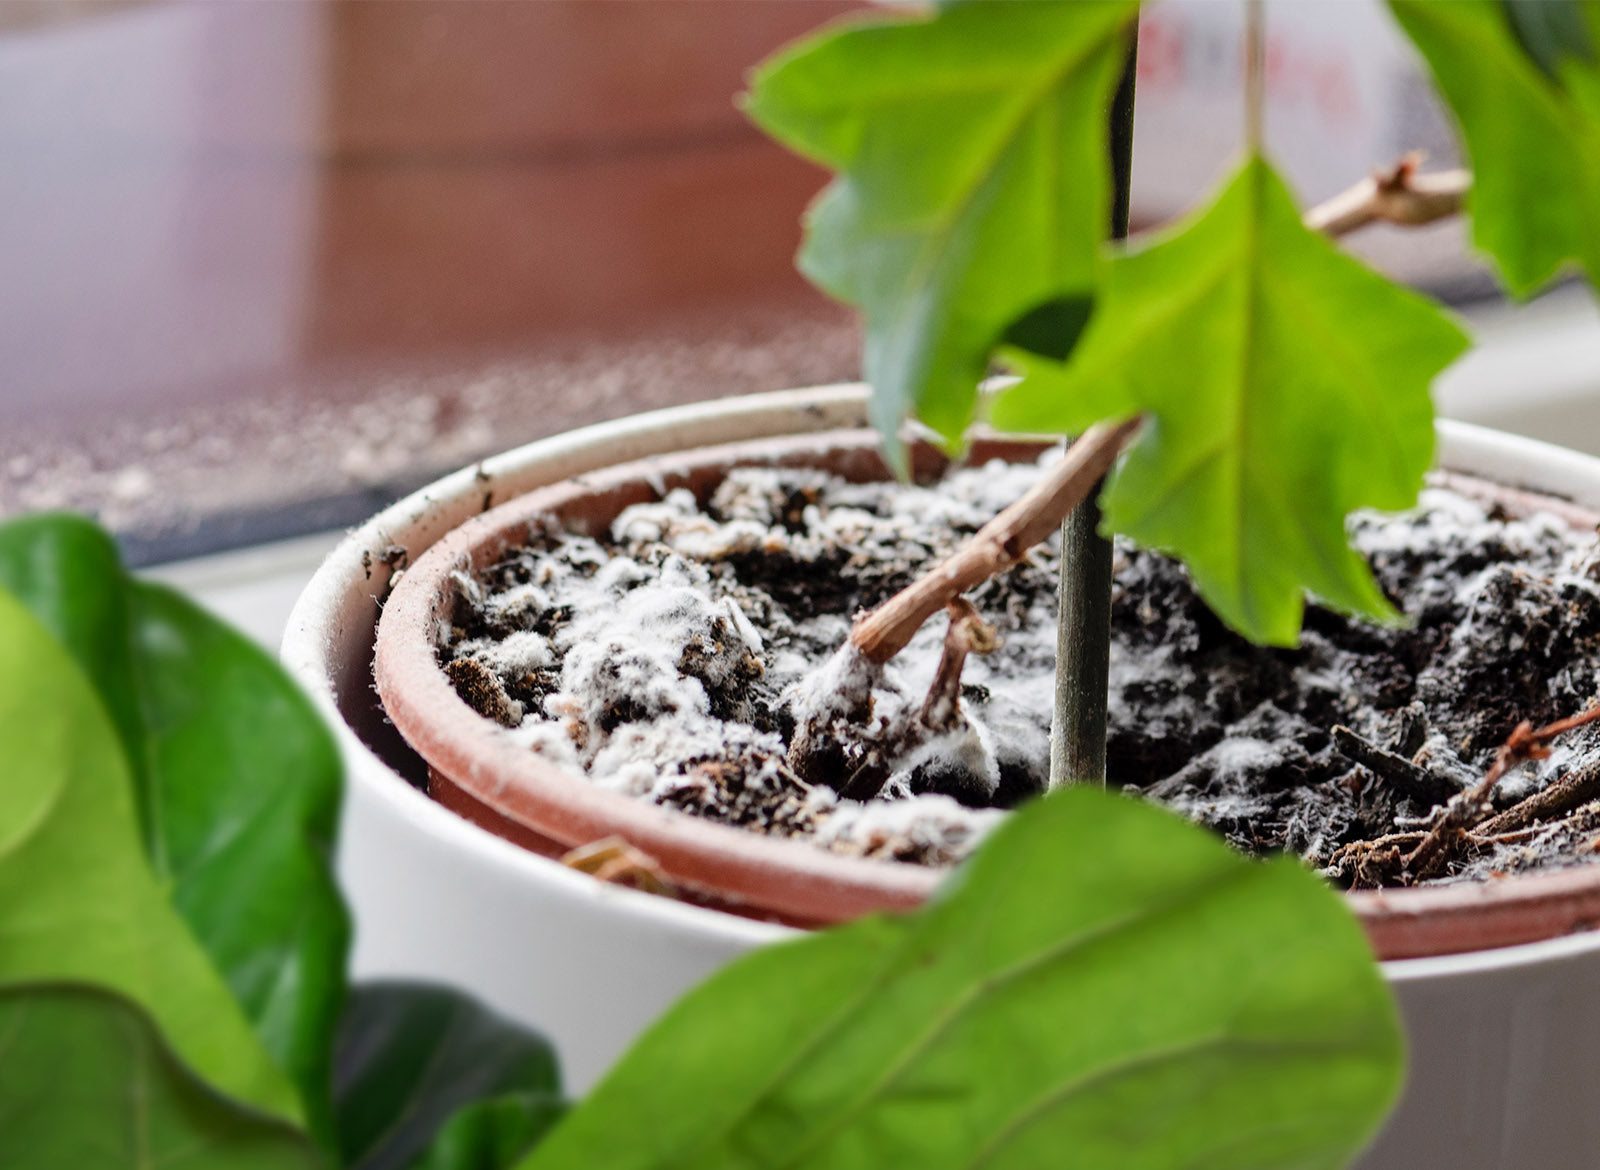 Mushrooms in Your Houseplants: How to Eliminate Fungus for Good